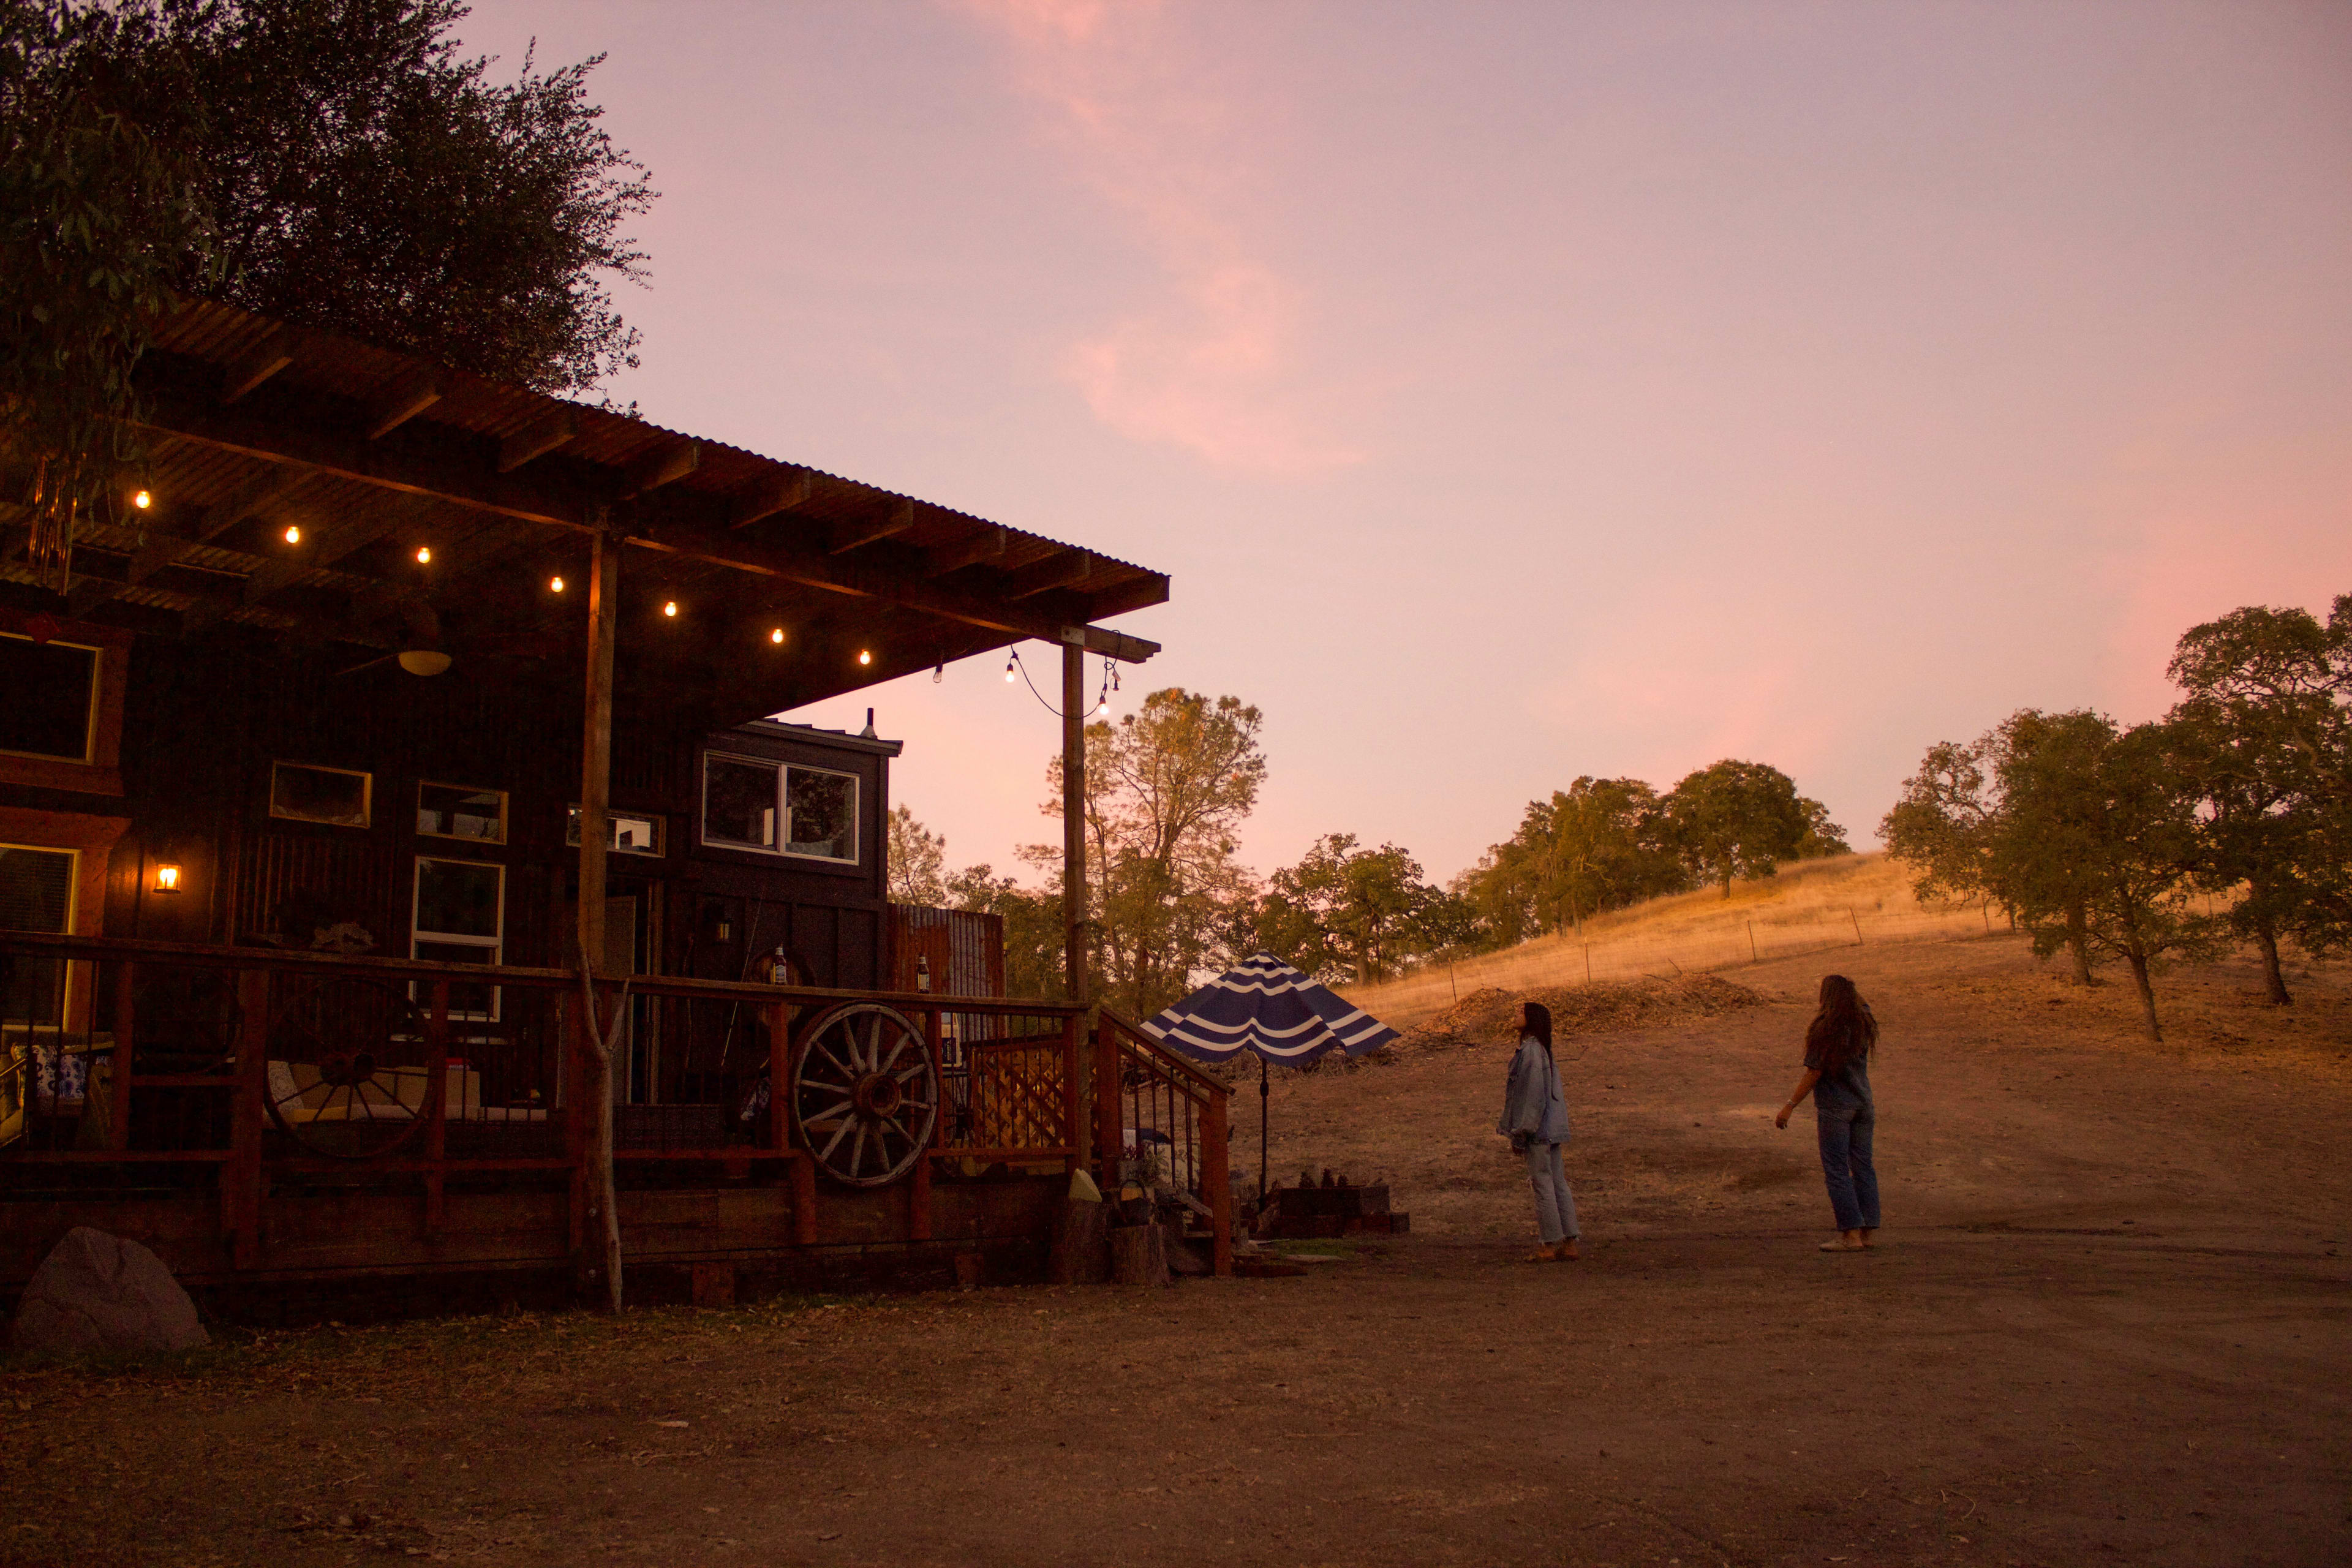 Sunset at Raven Bear Ranch is amazing. You can get views from all around the property; watch from the front porch or grab a blanket and venture up the hill to get the best seat in the house.